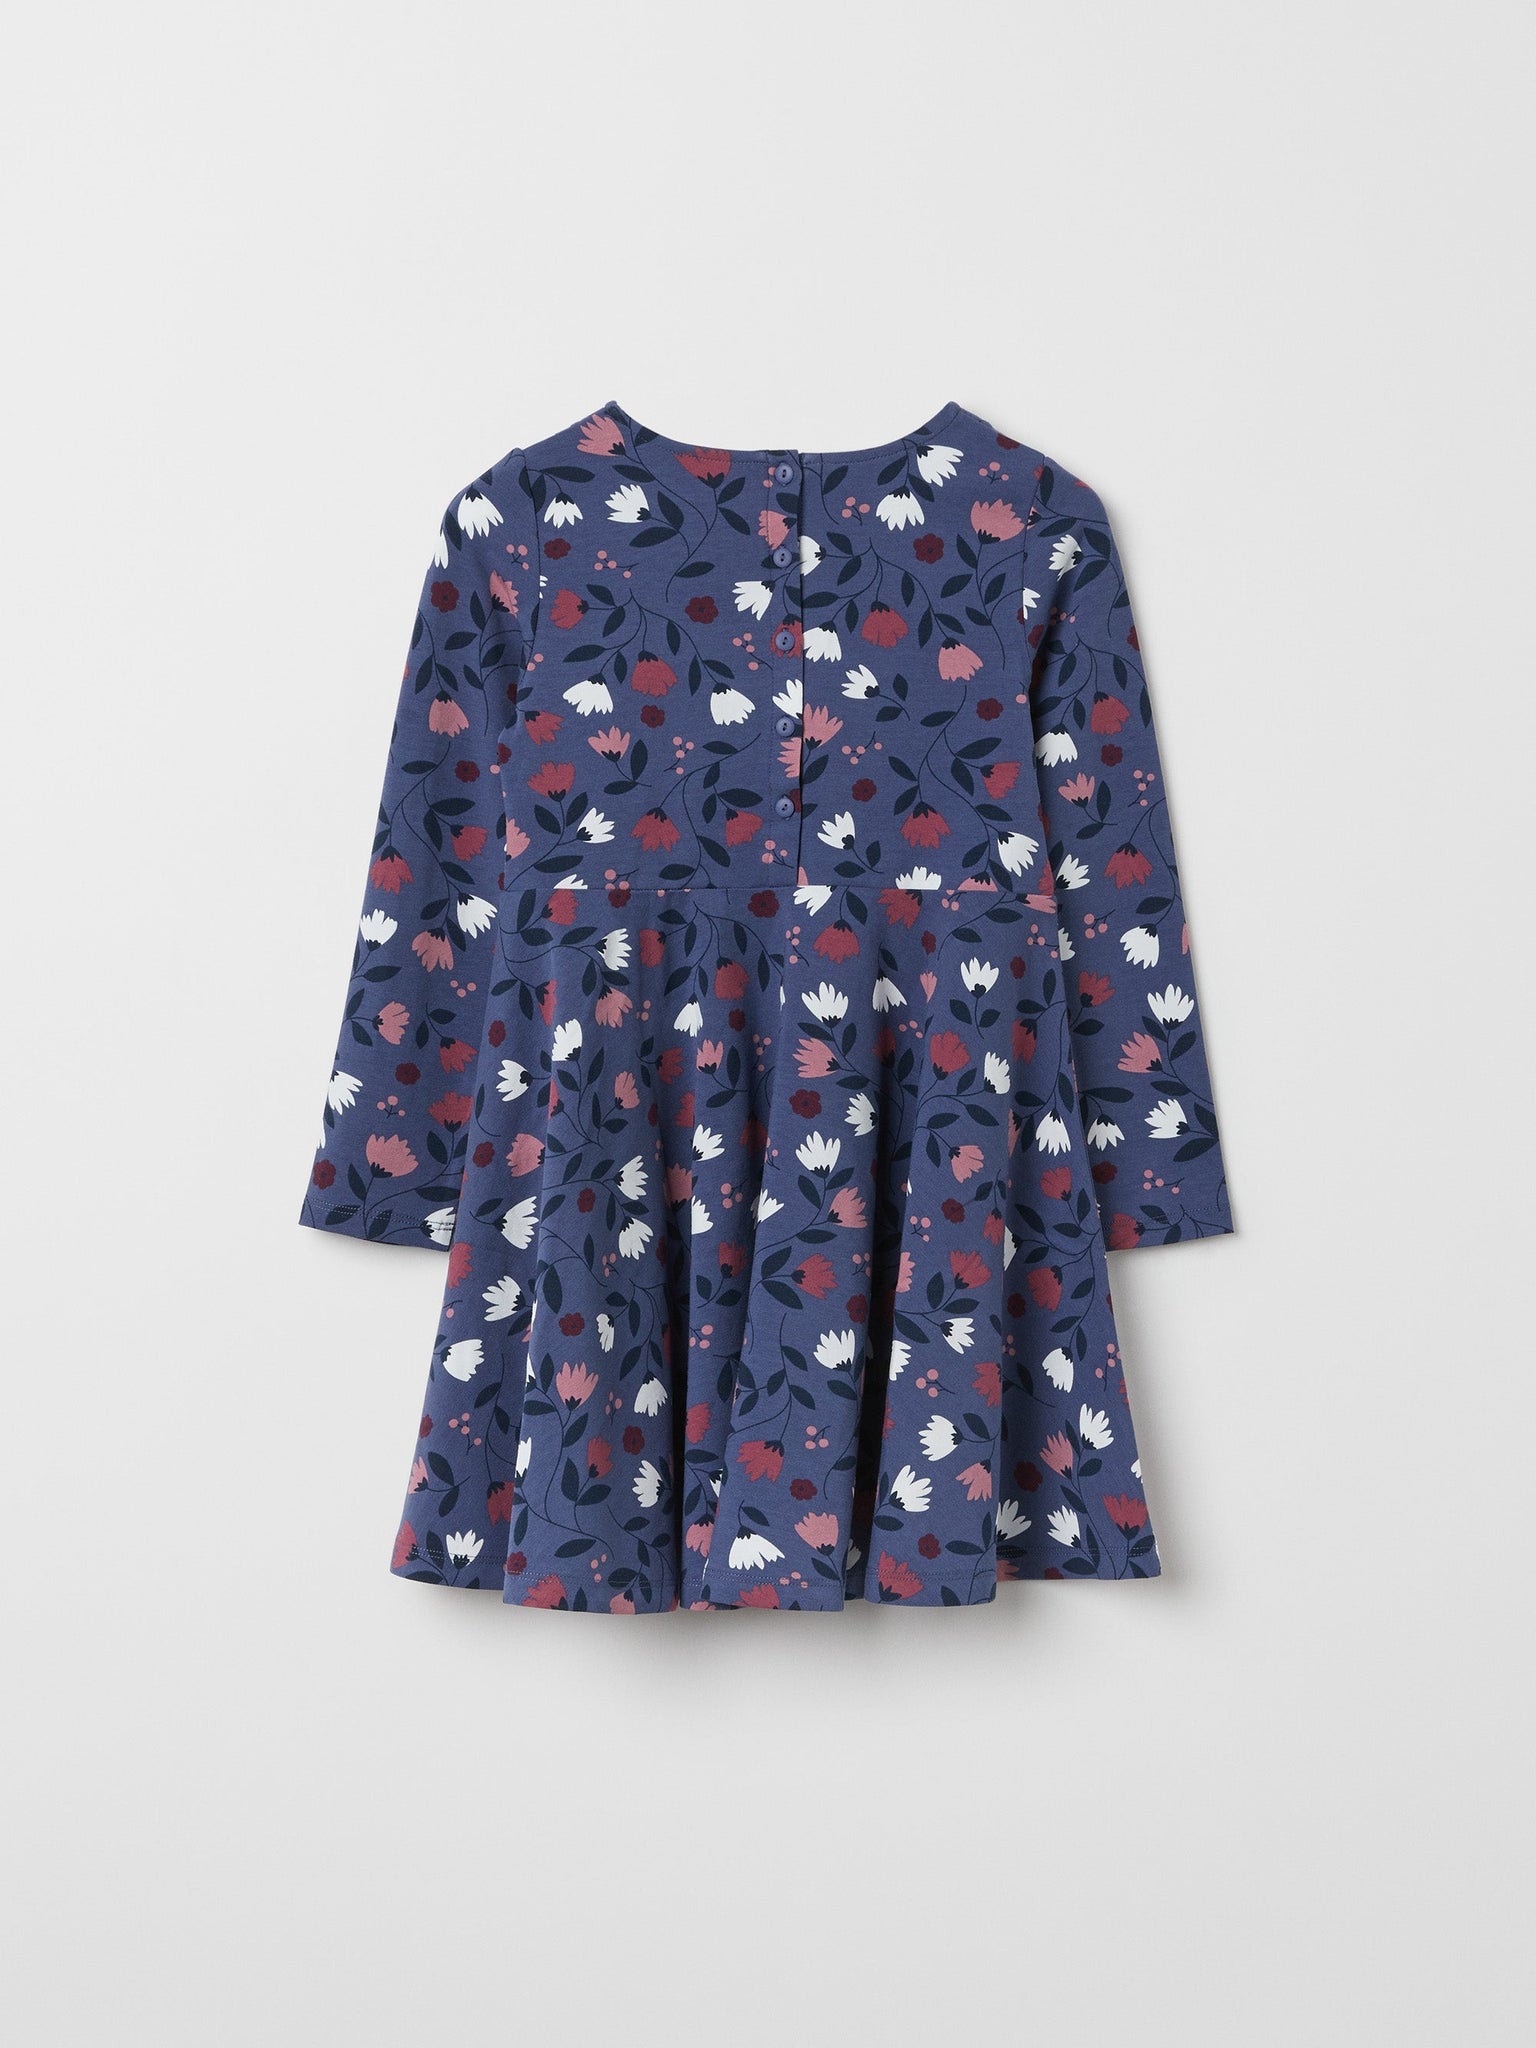 Organic Cotton Blue Floral Kids Dress from the Polarn O. Pyret kidswear collection. The best ethical kids clothes